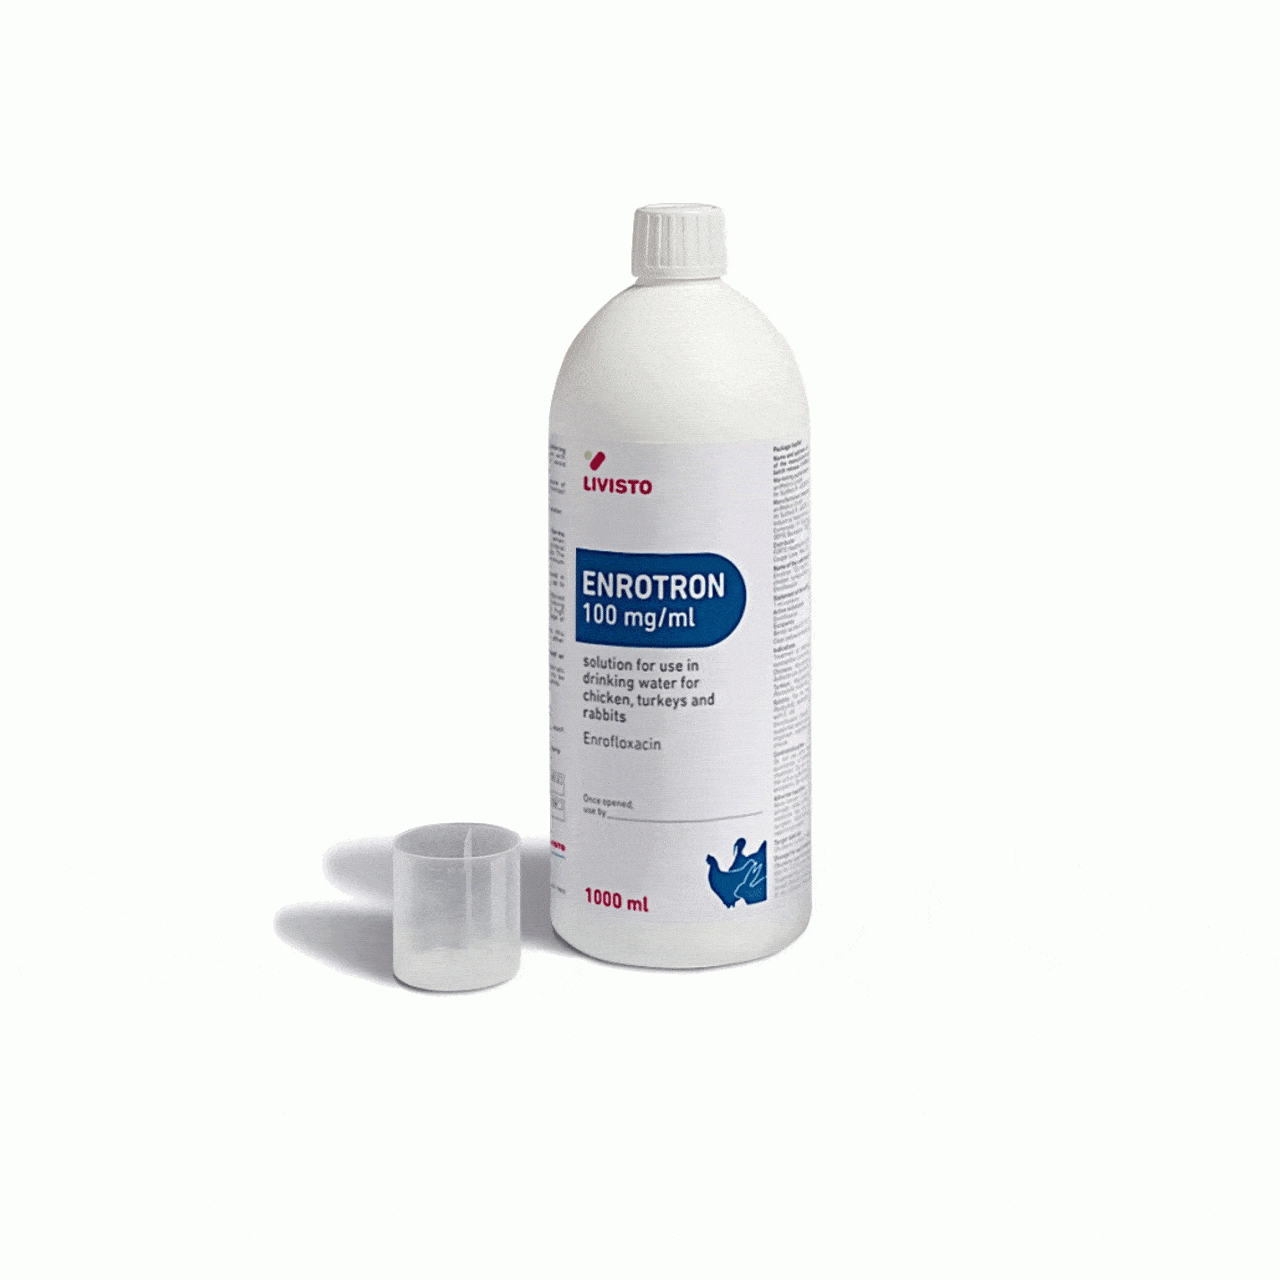 Enrotron 100 mg/ml solution for use in drinking water for chickens, turkeys and rabbits